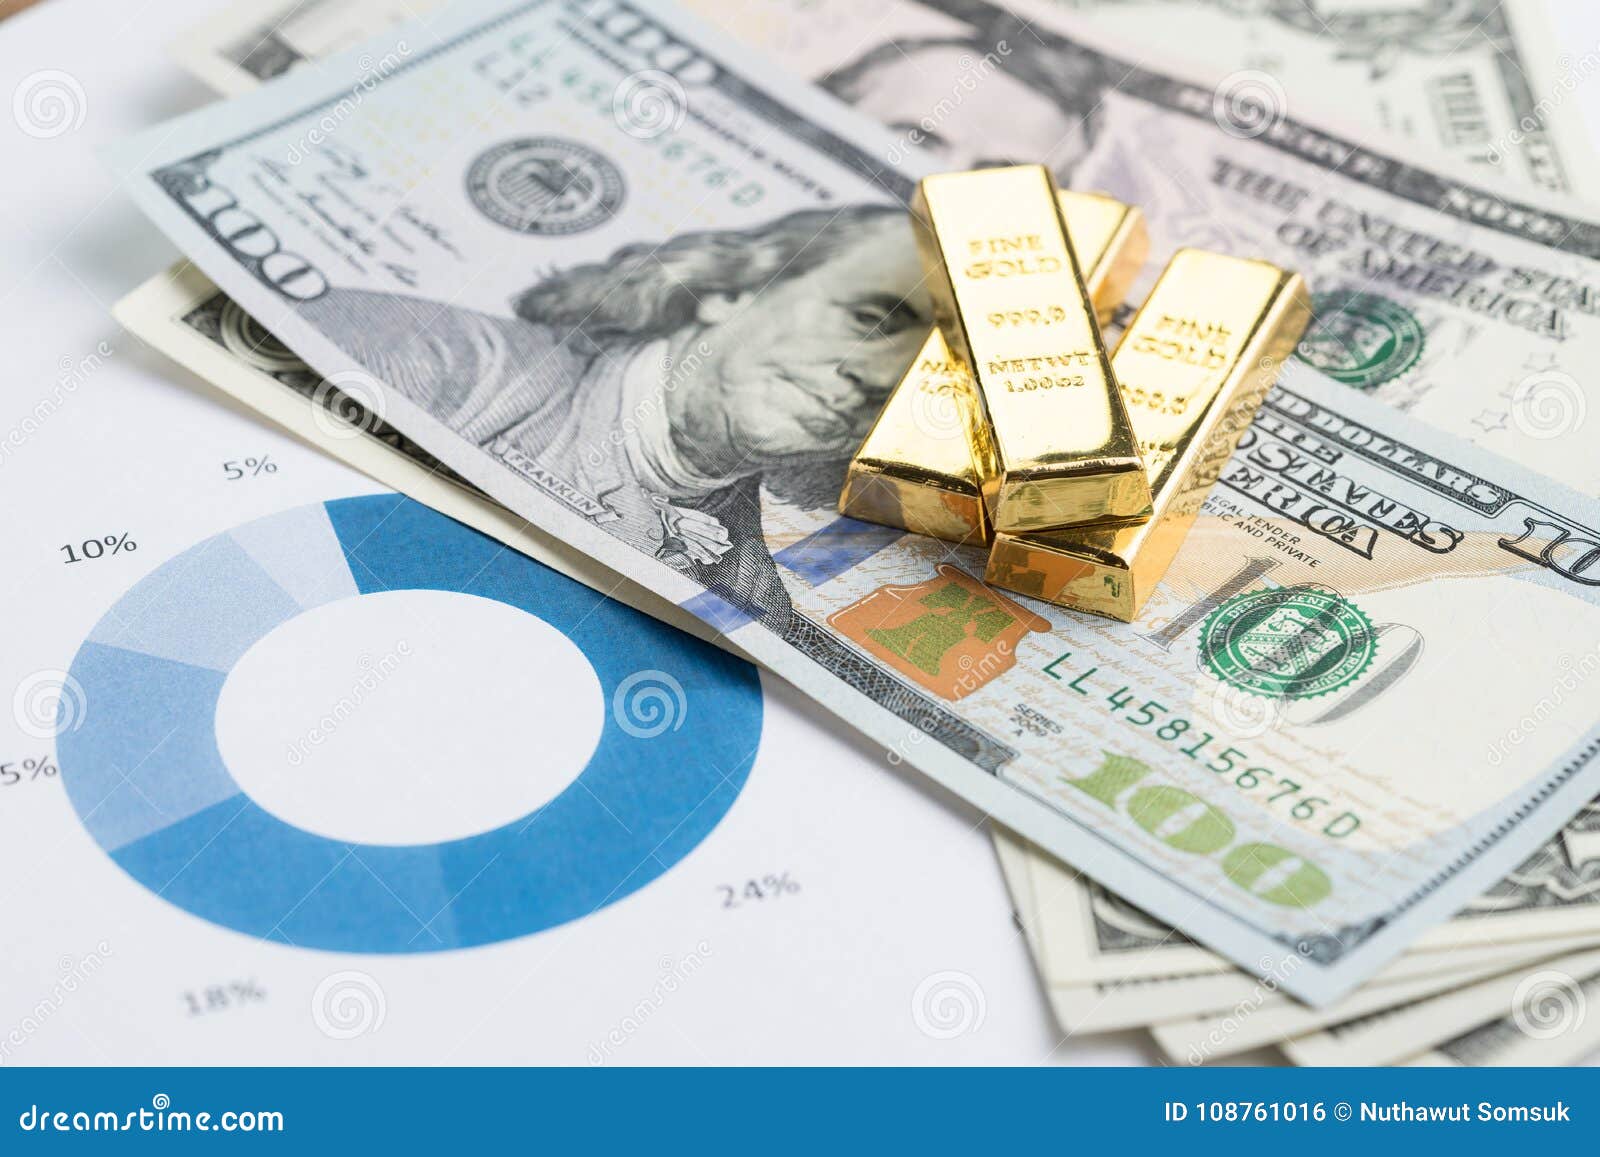 wealth management or investment asset allocation concept, gold b